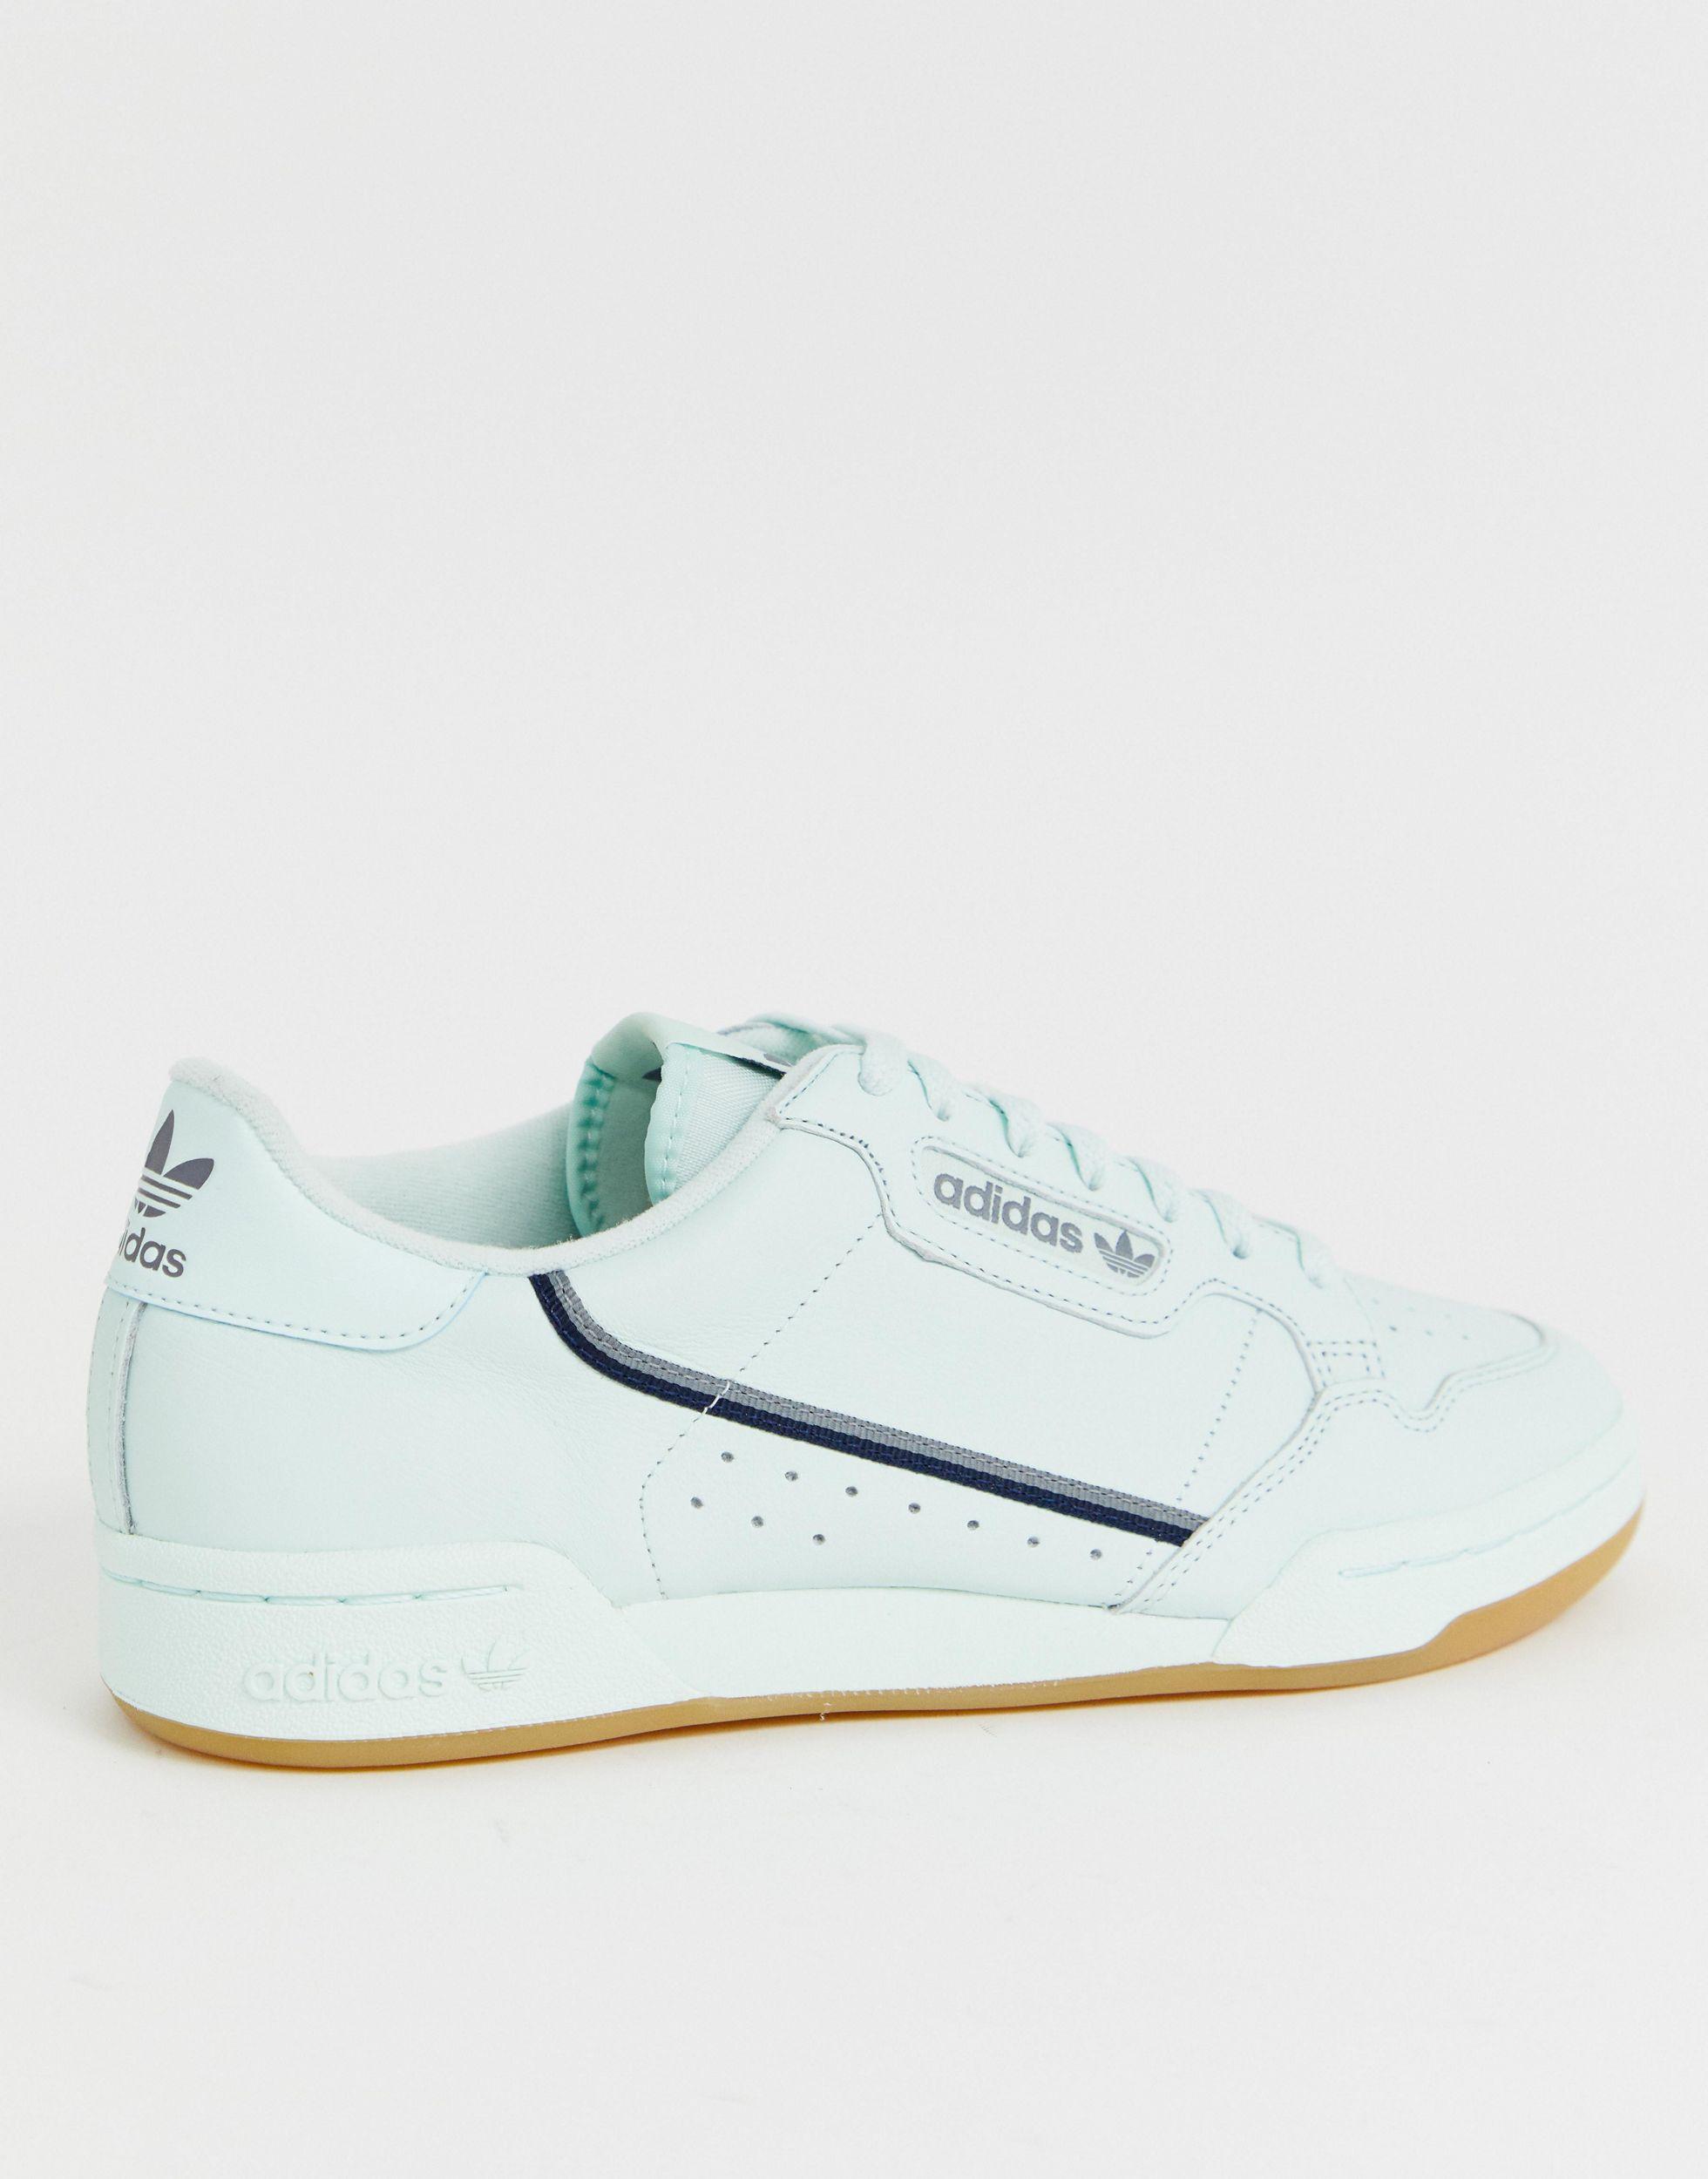 adidas Originals Leather Continental 80s in Green for Men - Save 14% - Lyst